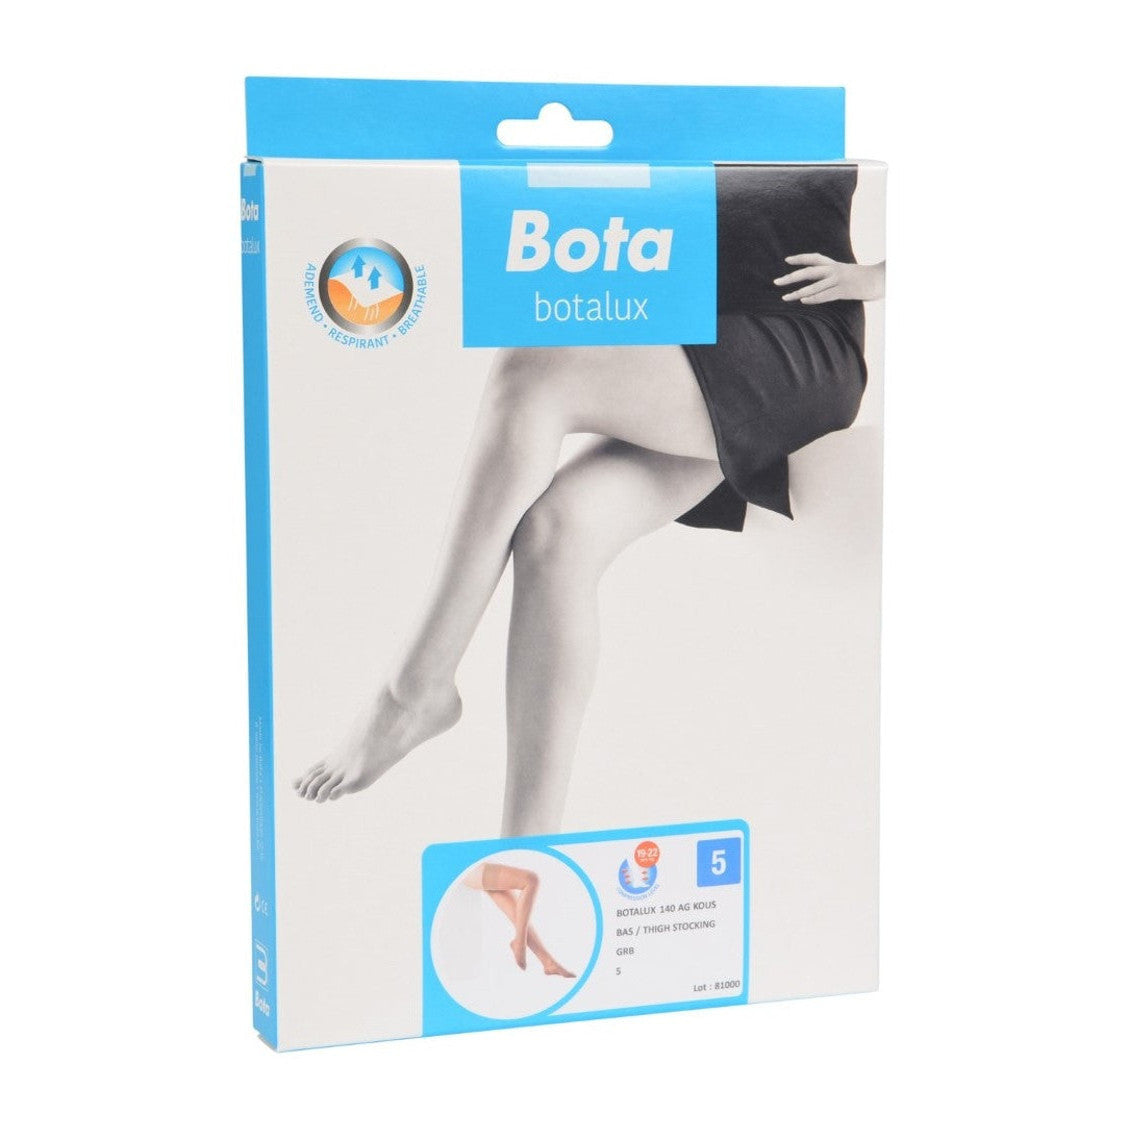 Botalux 140 support stocking ag grb gray beige